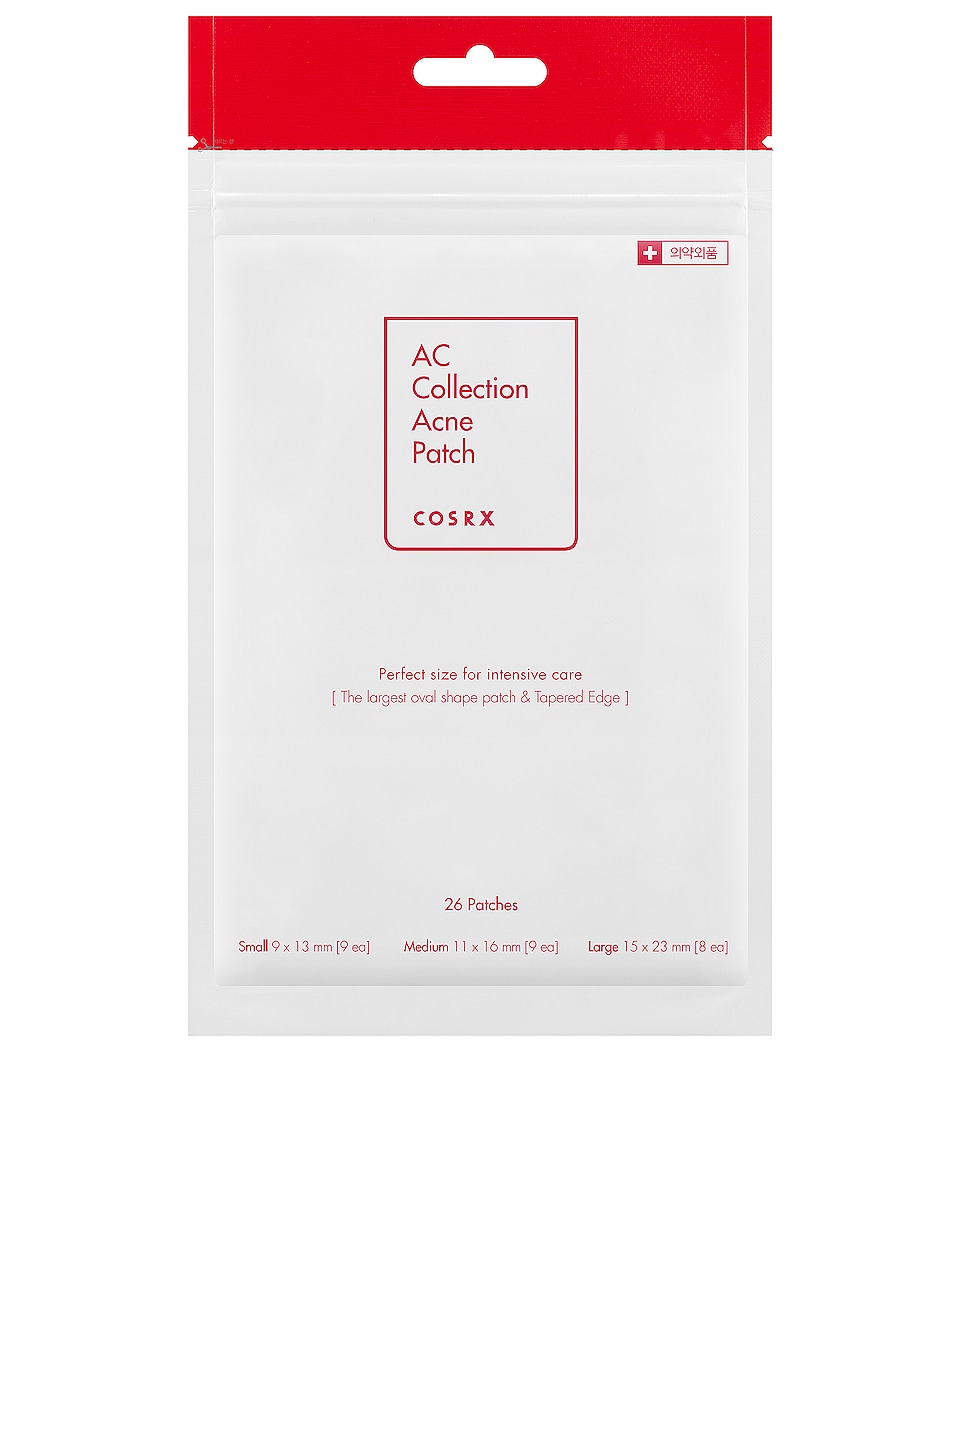 COSRX AC COLLECTION ACNE PATCH,CORX-WU47